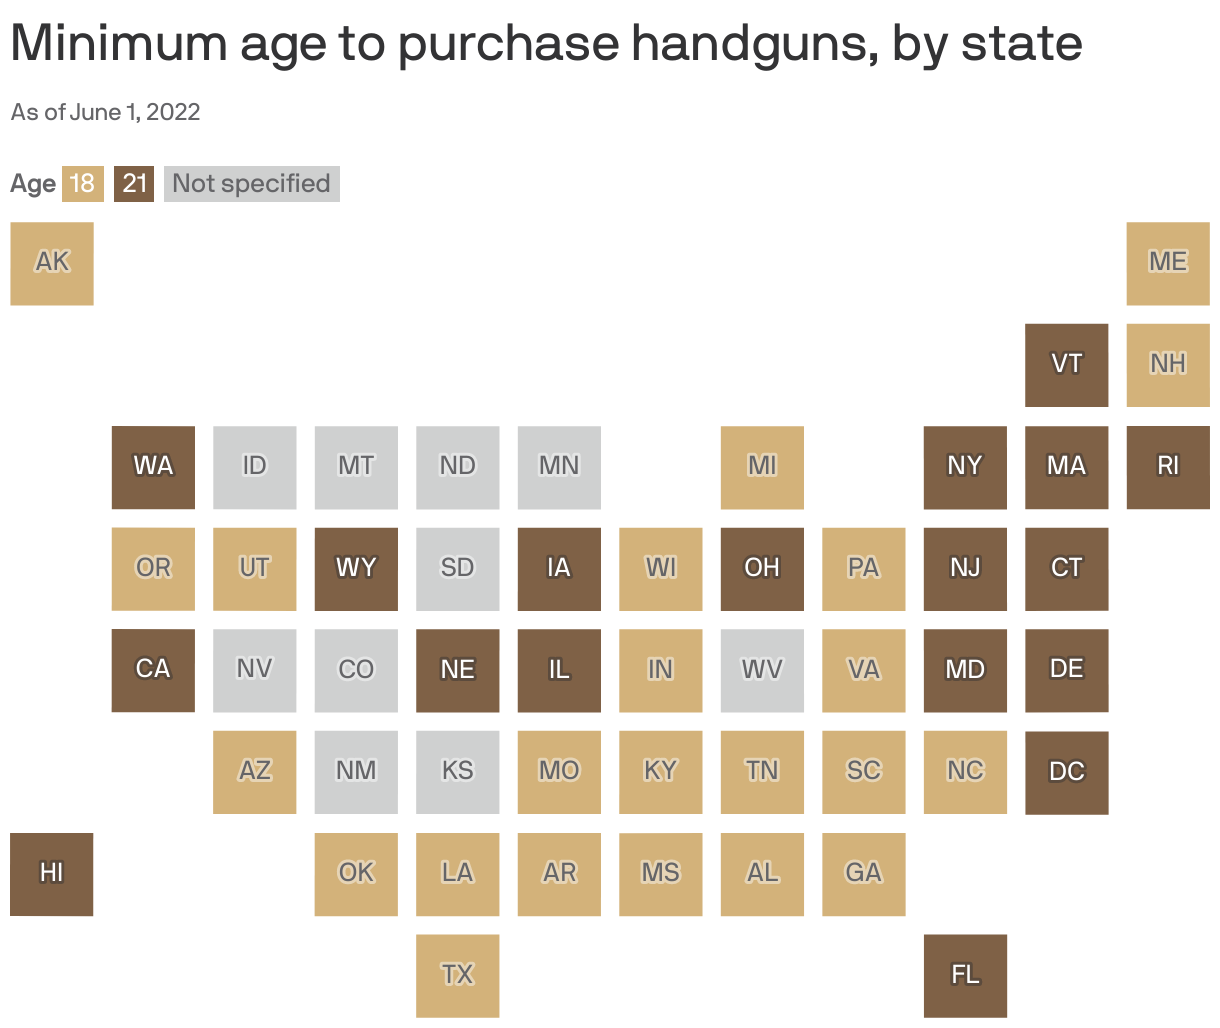 Minimum age to purchase handguns, by state